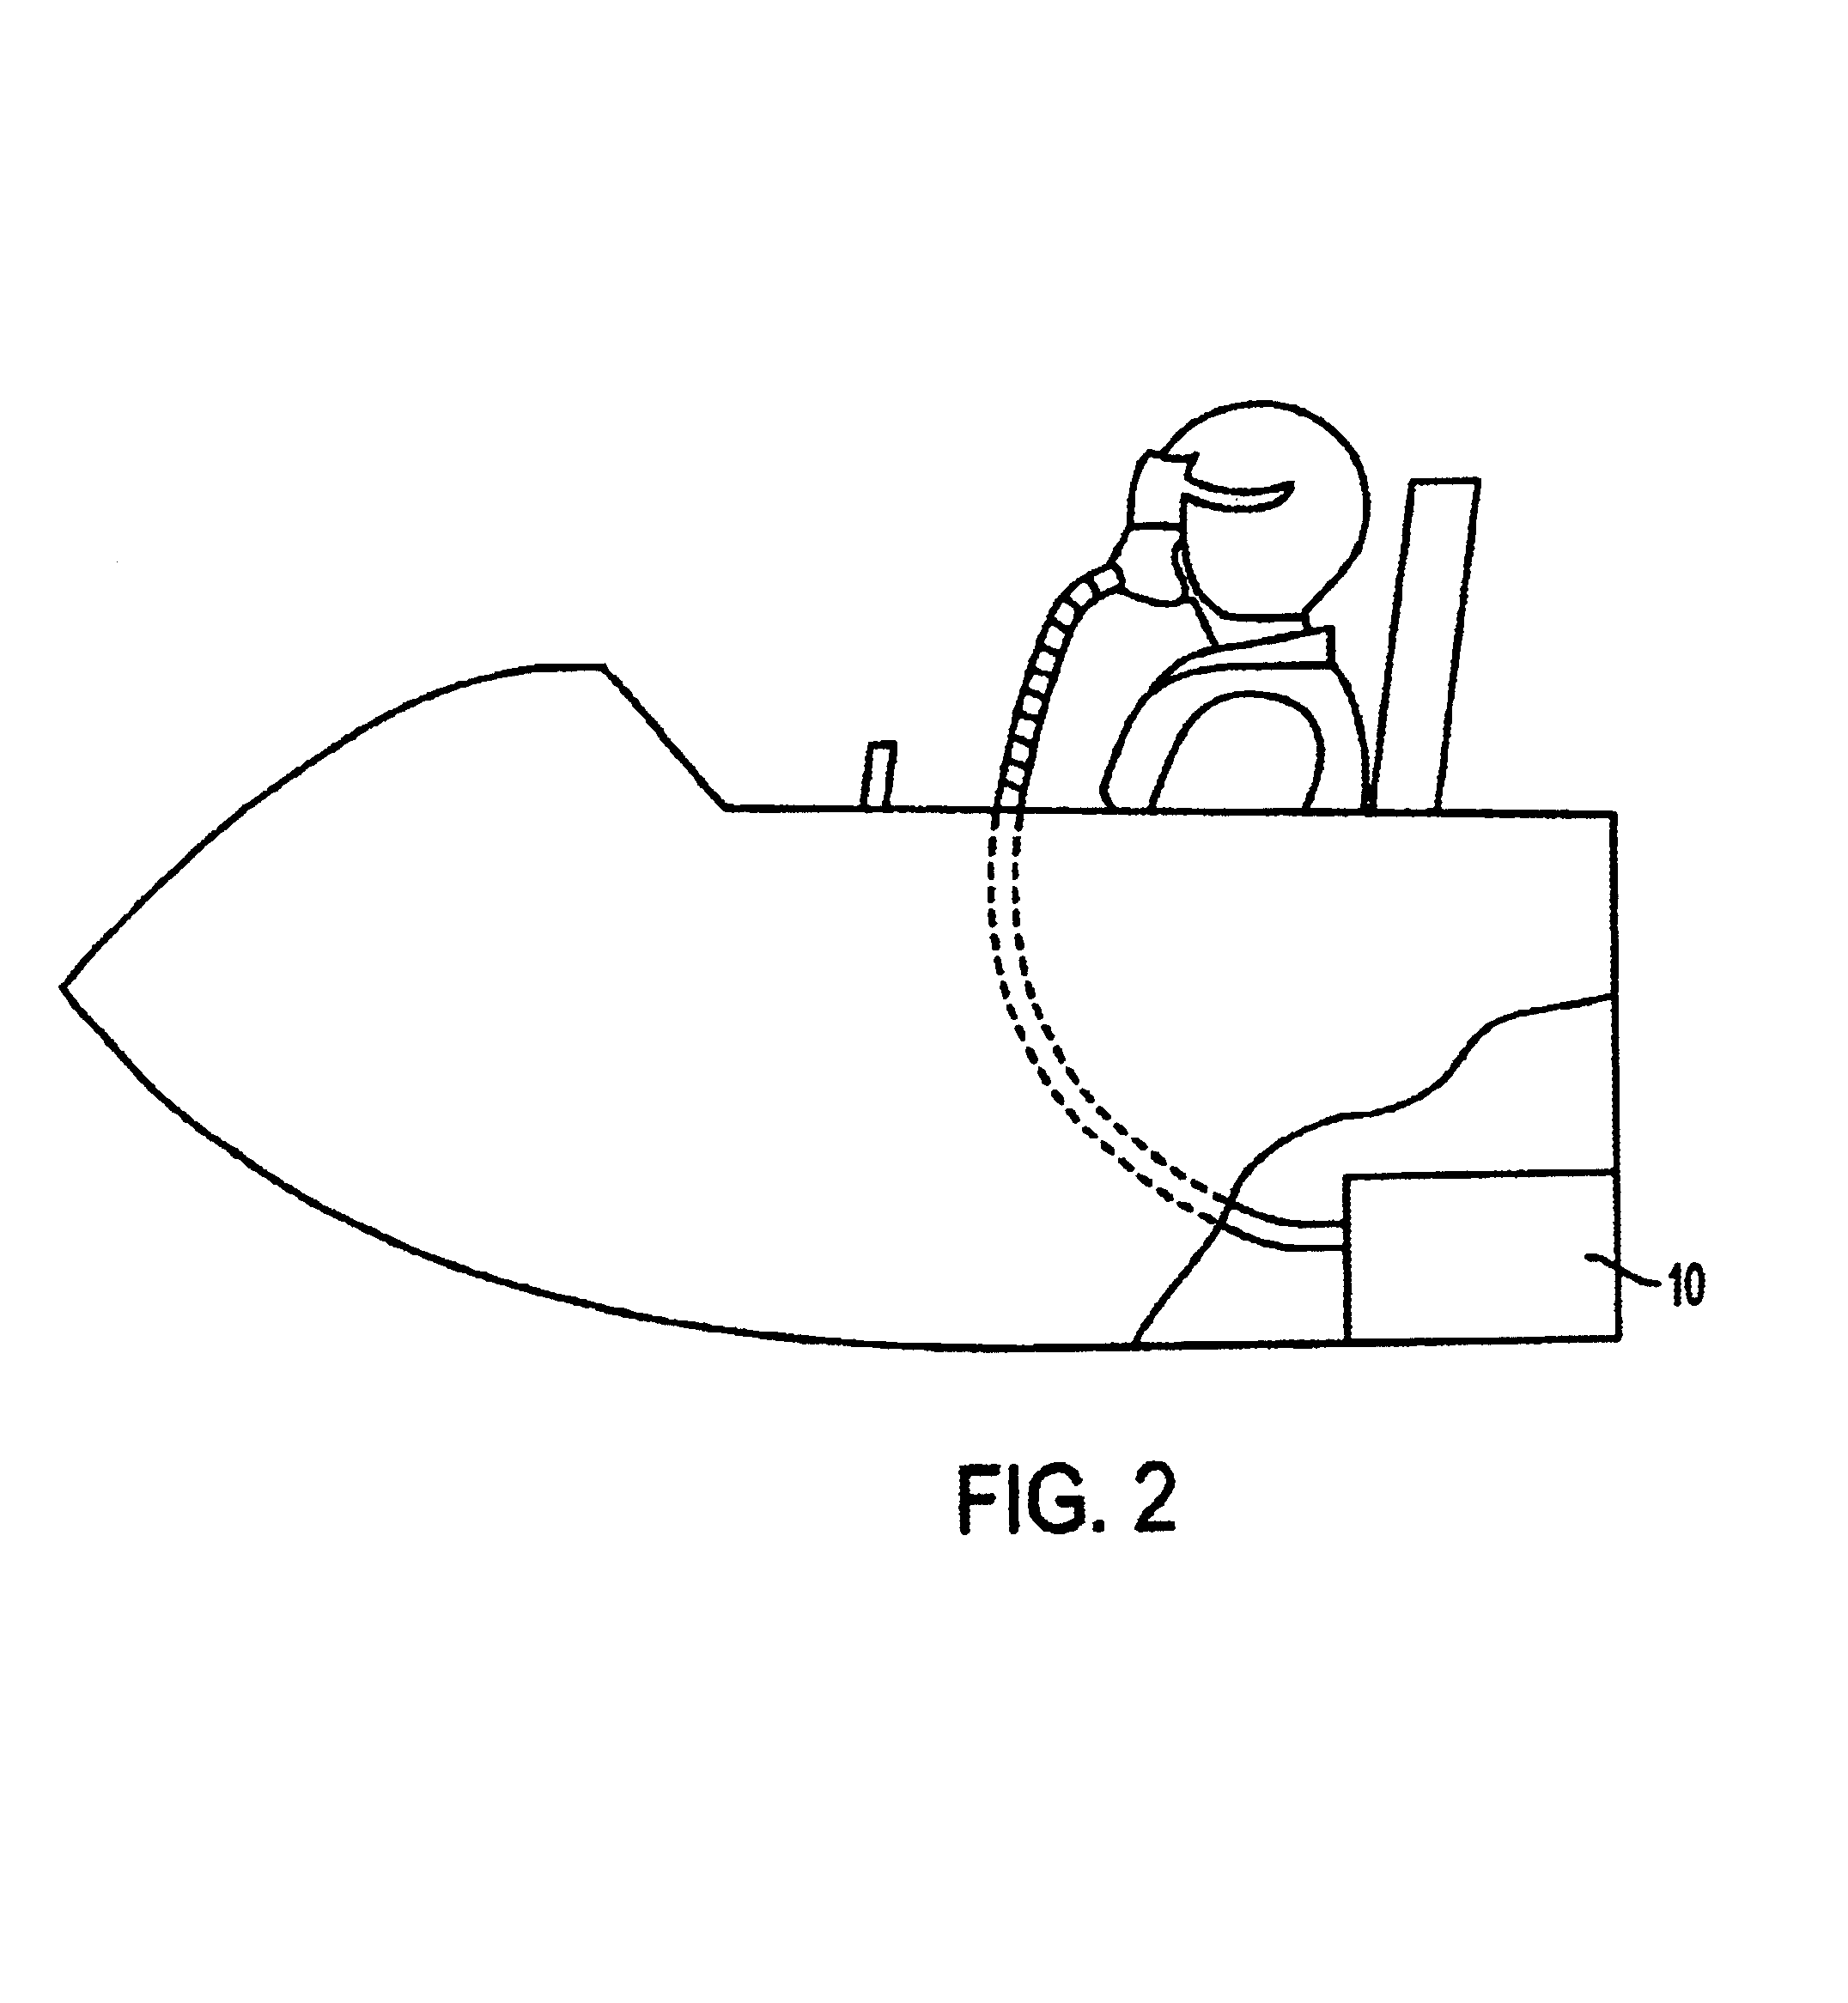 Reduced-oxygen breathing device